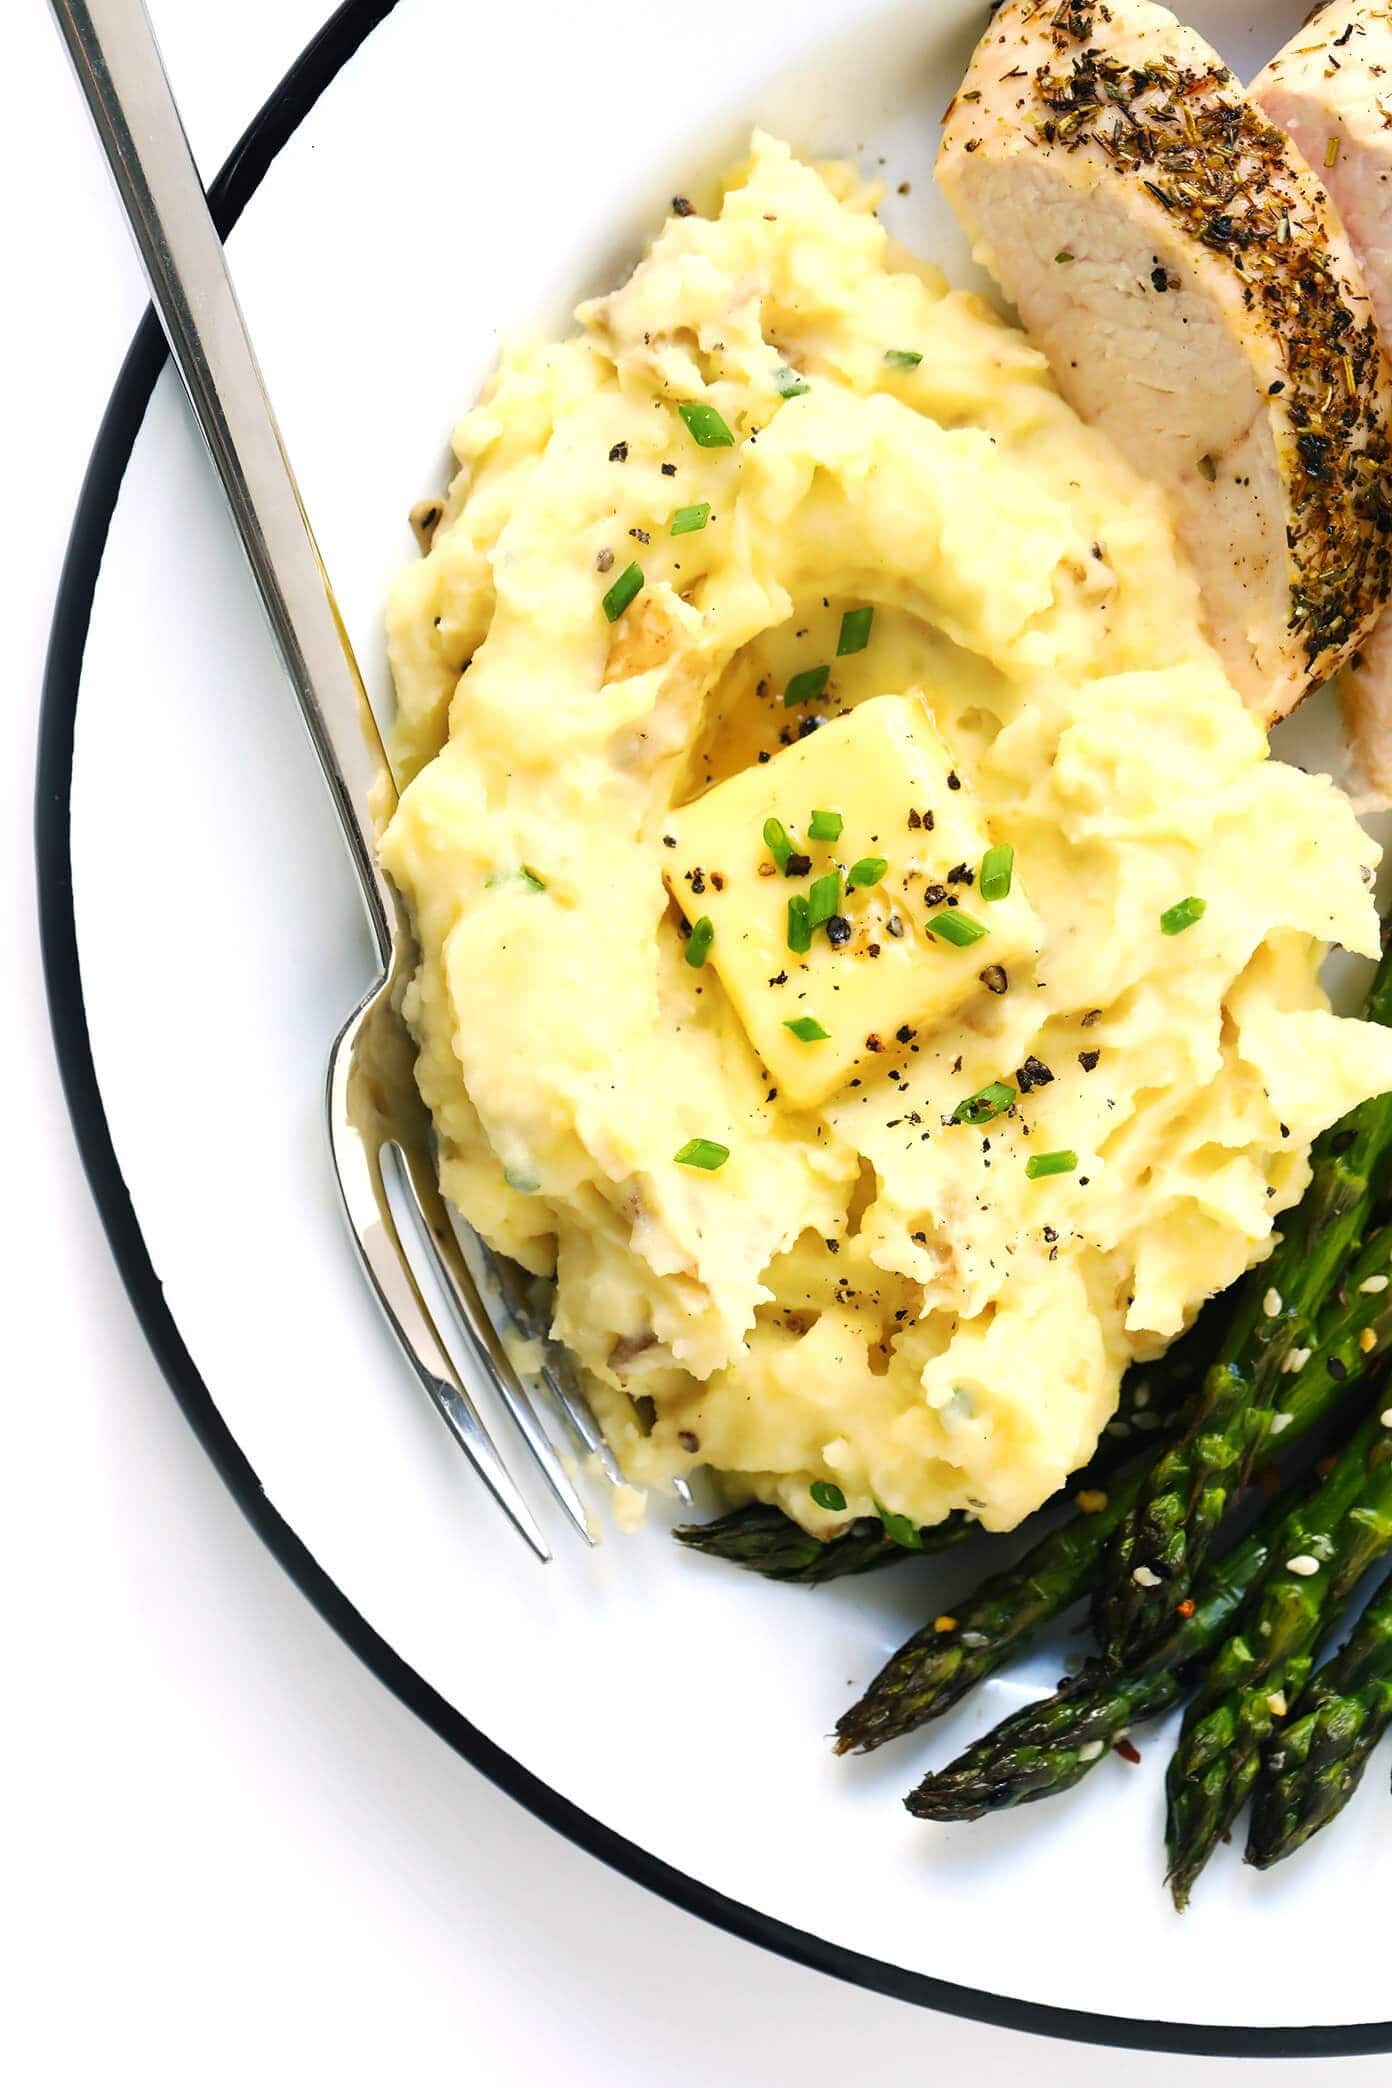 Mashed potatoes with roasted chicken and asparagus served on a white plate. 